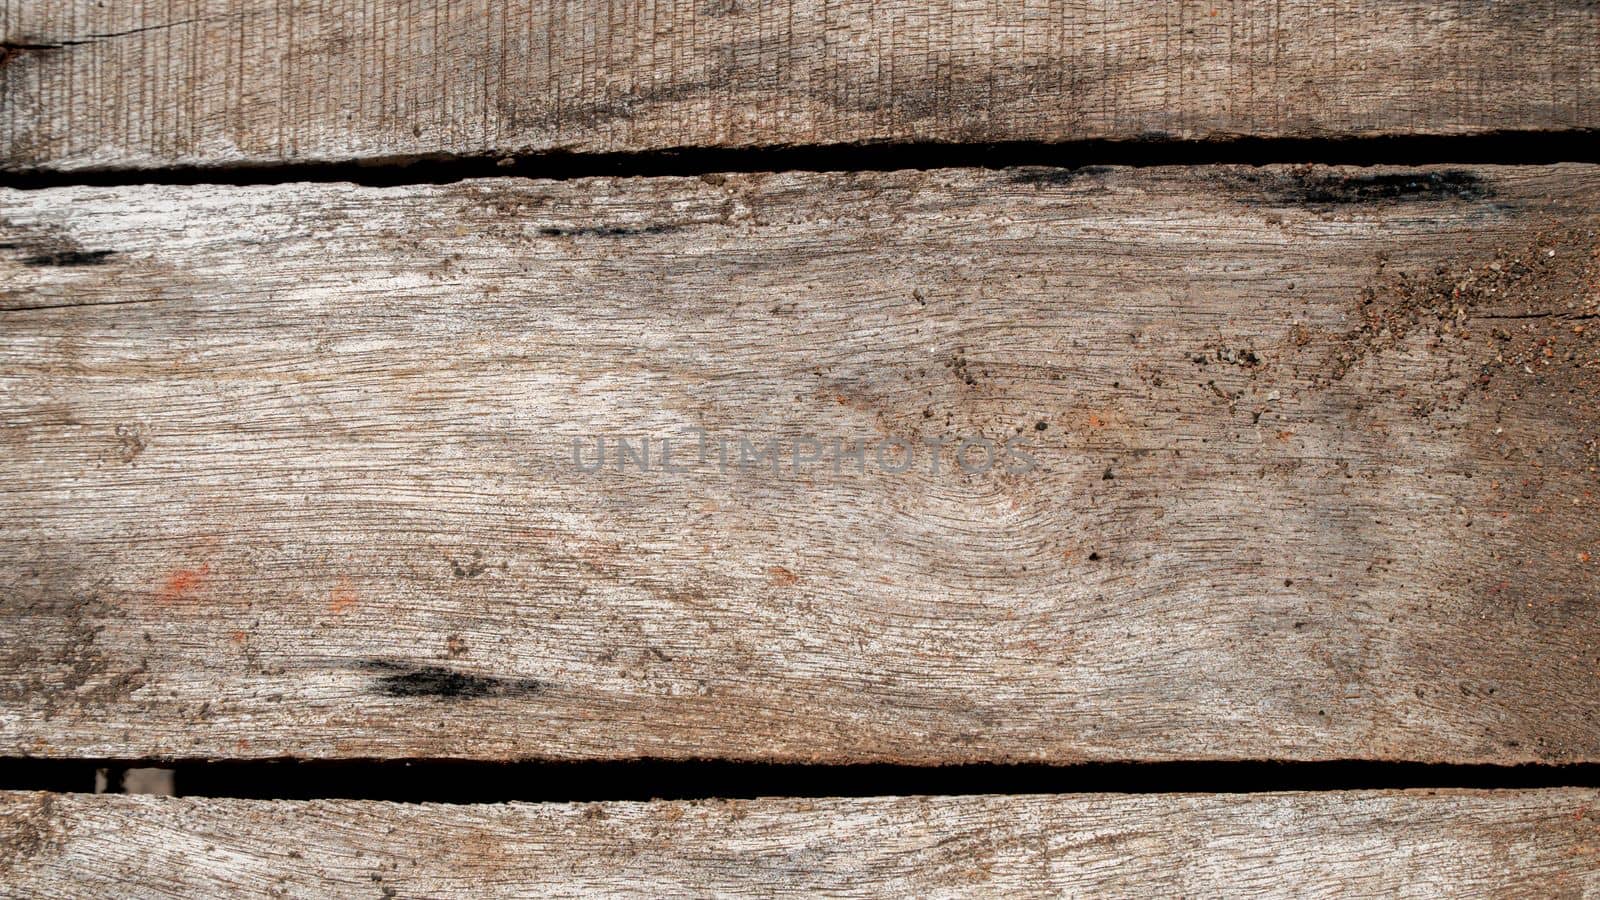 Wooden old plank texture close-up. High quality photo